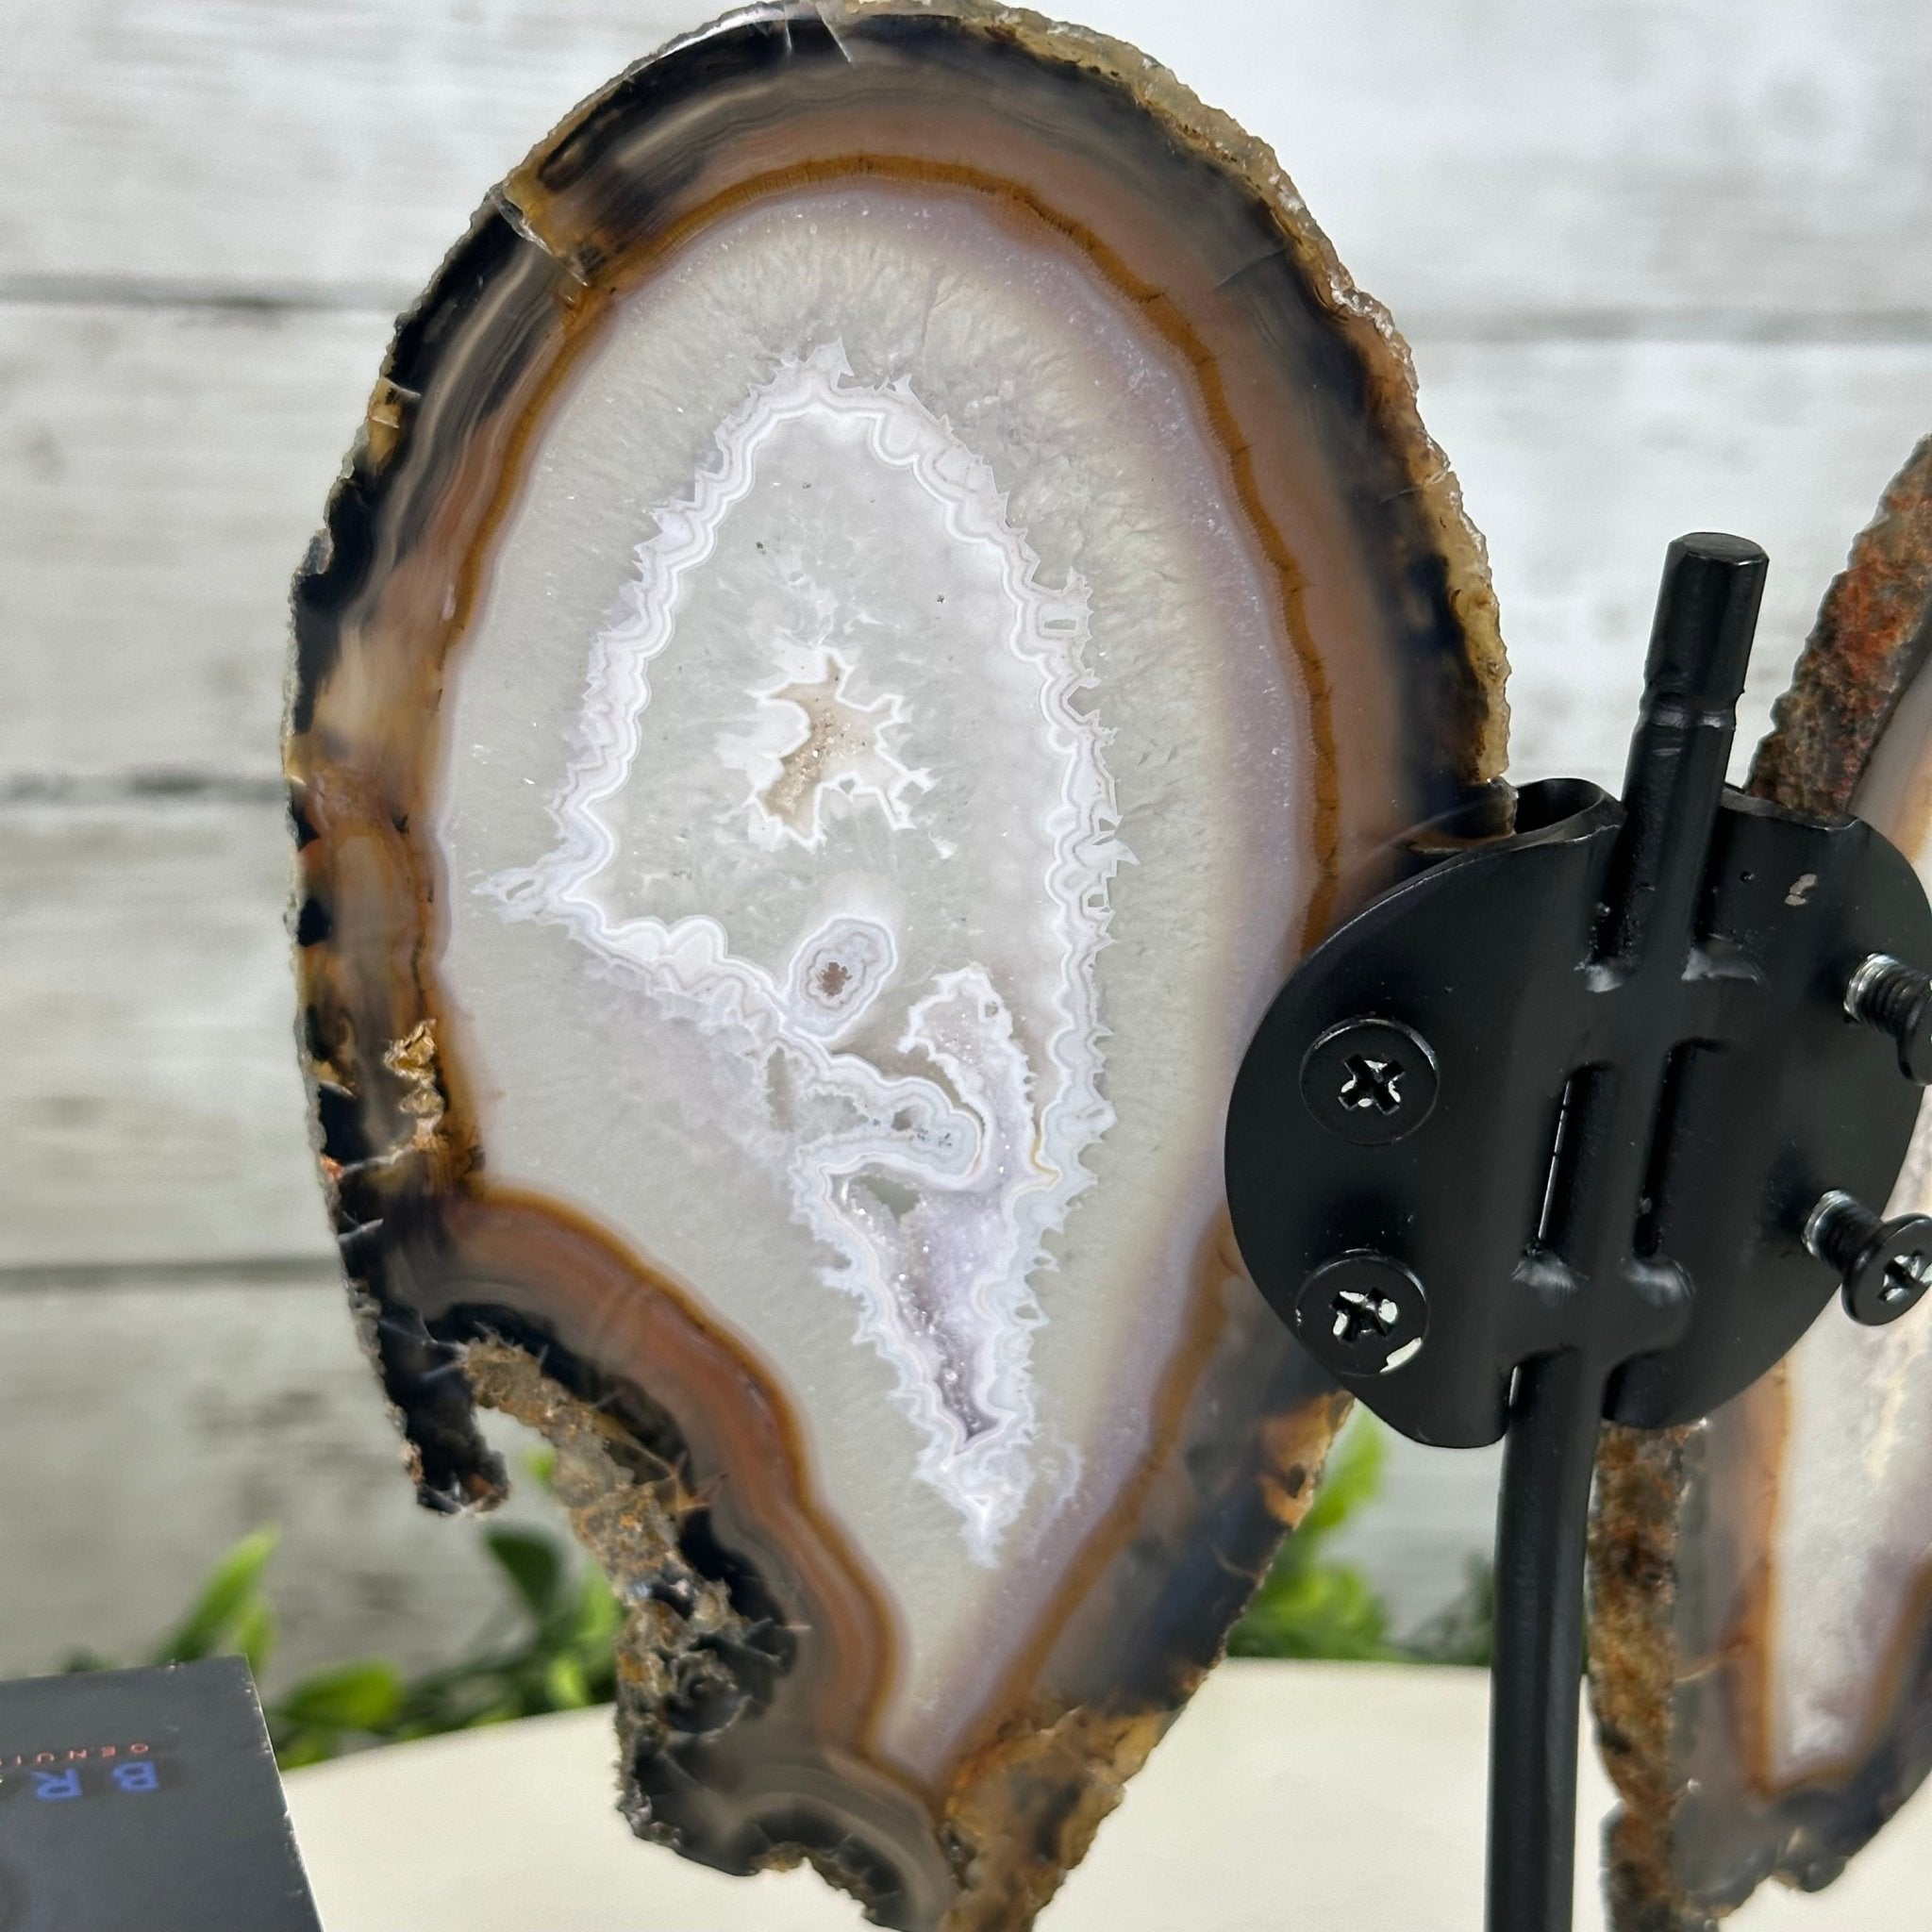 Natural Brazilian Agate "Butterfly Wings", 7.6" Tall #5050NA-136 - Brazil GemsBrazil GemsNatural Brazilian Agate "Butterfly Wings", 7.6" Tall #5050NA-136Agate Butterfly Wings5050NA-136